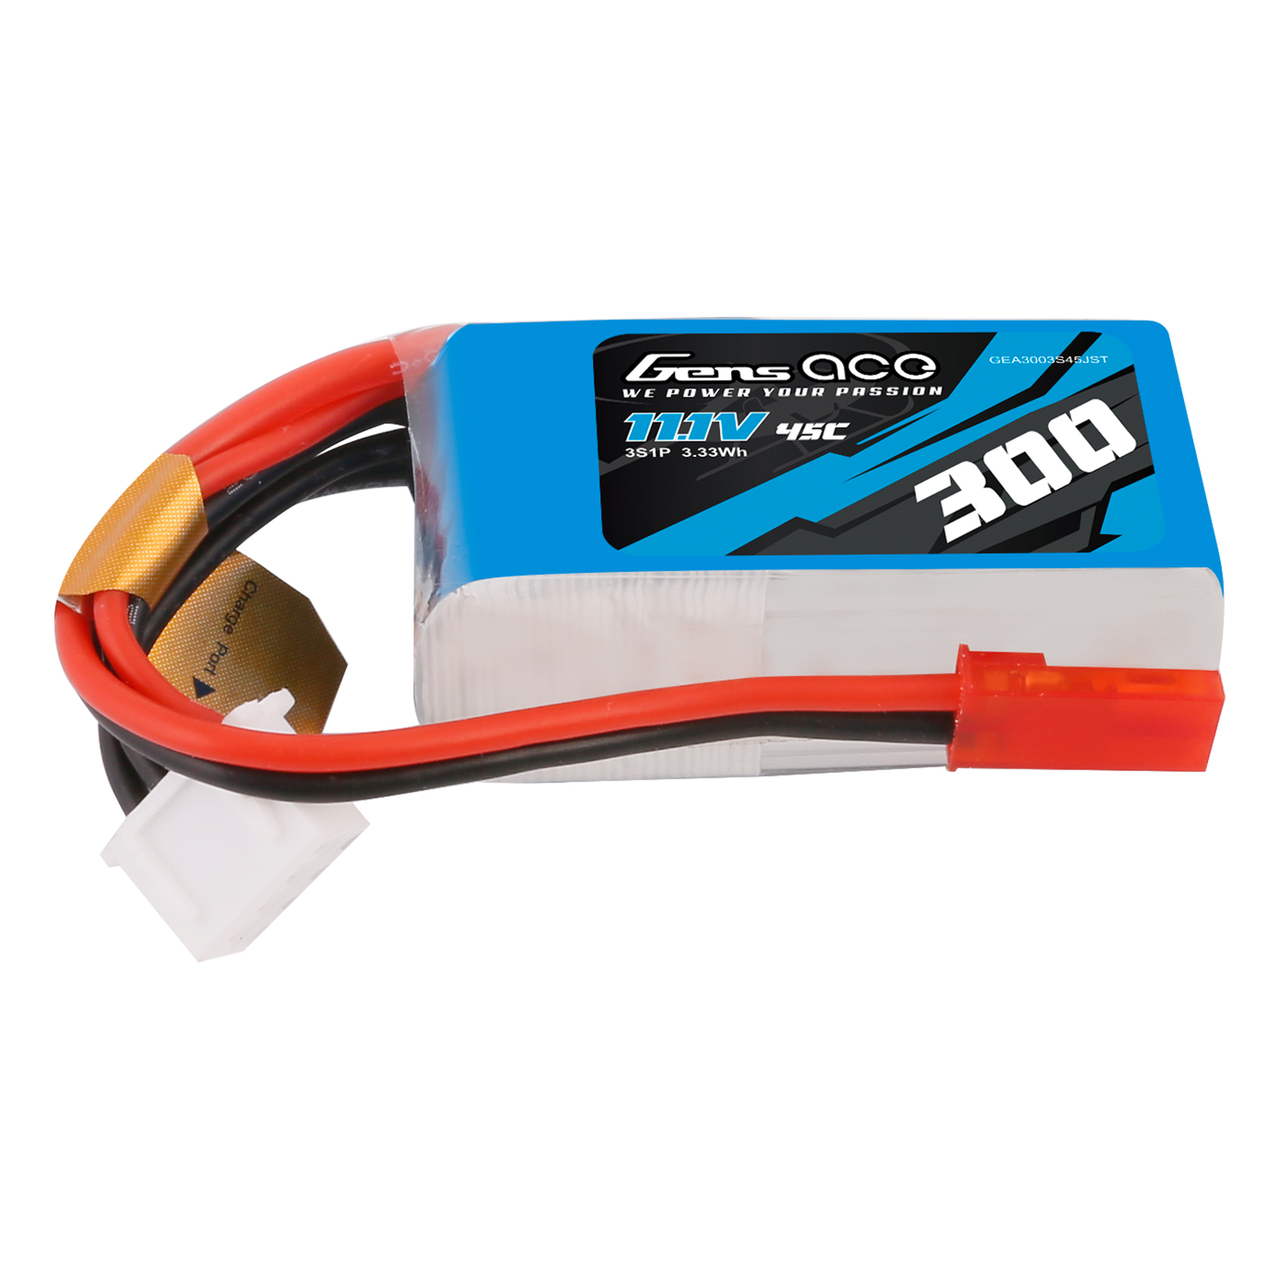 Gens ace 300 mAh 11.1V  45C 3S1P Lipo Battery Pack with JST Plug